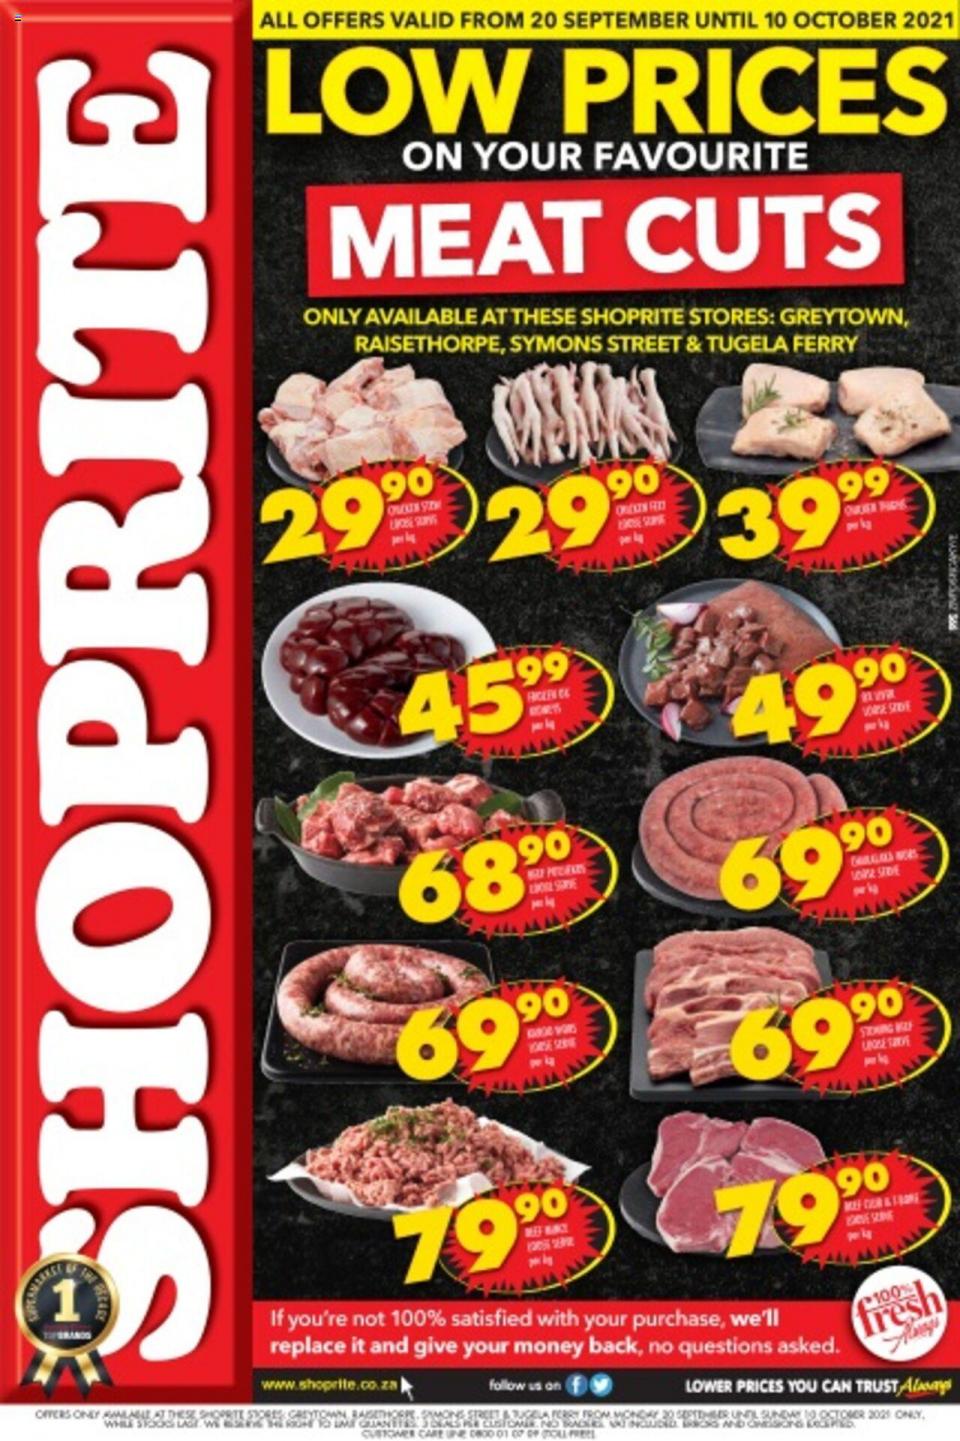 Shoprite Specials Low Prices On Meat Cuts 20 Sep – 10 Oct 2021